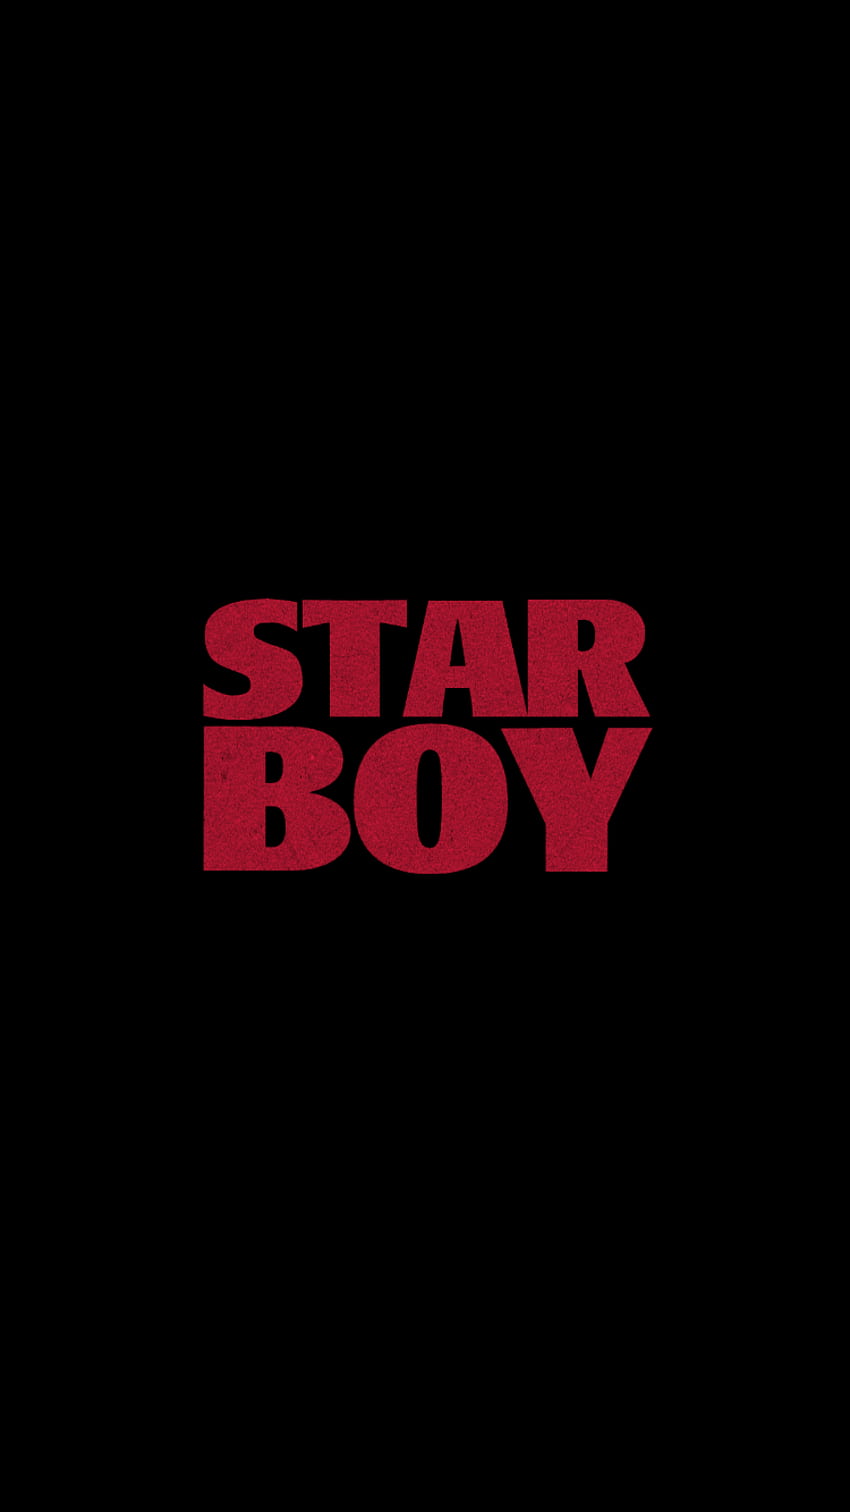 Starboy matching phone for iPhone 6 HD phone wallpaper